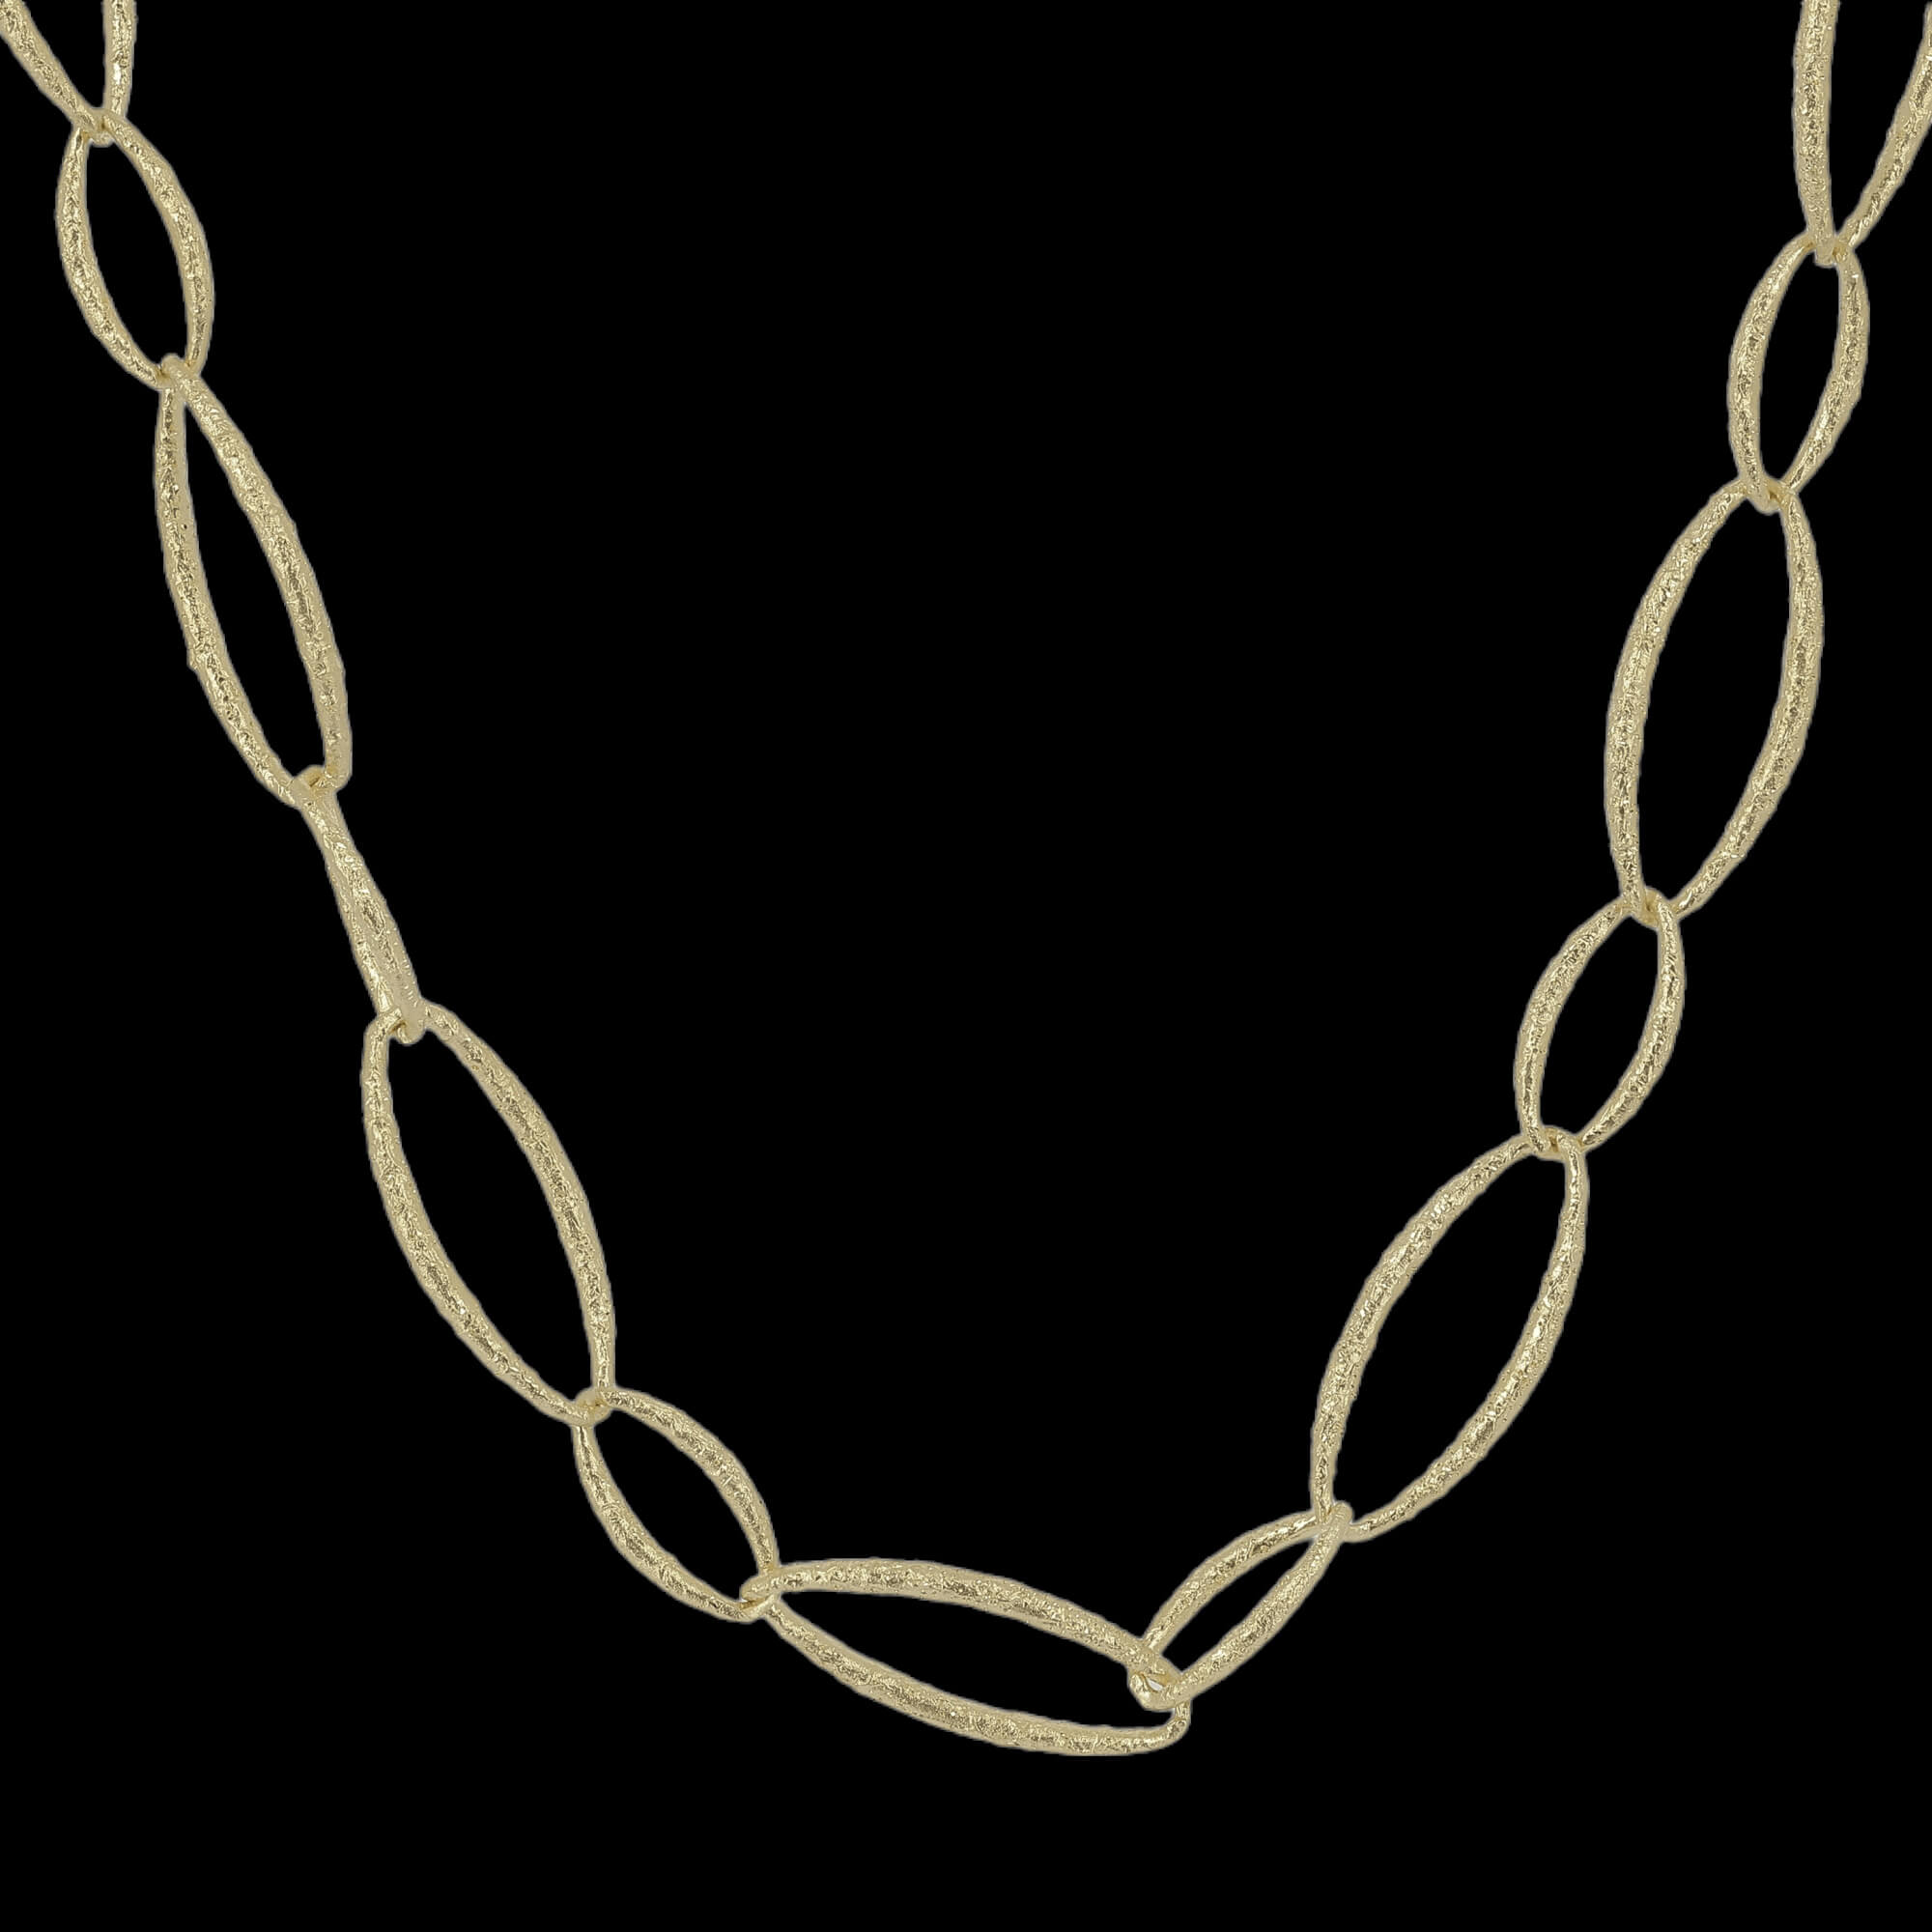 Long gold plated and beautiful link chain